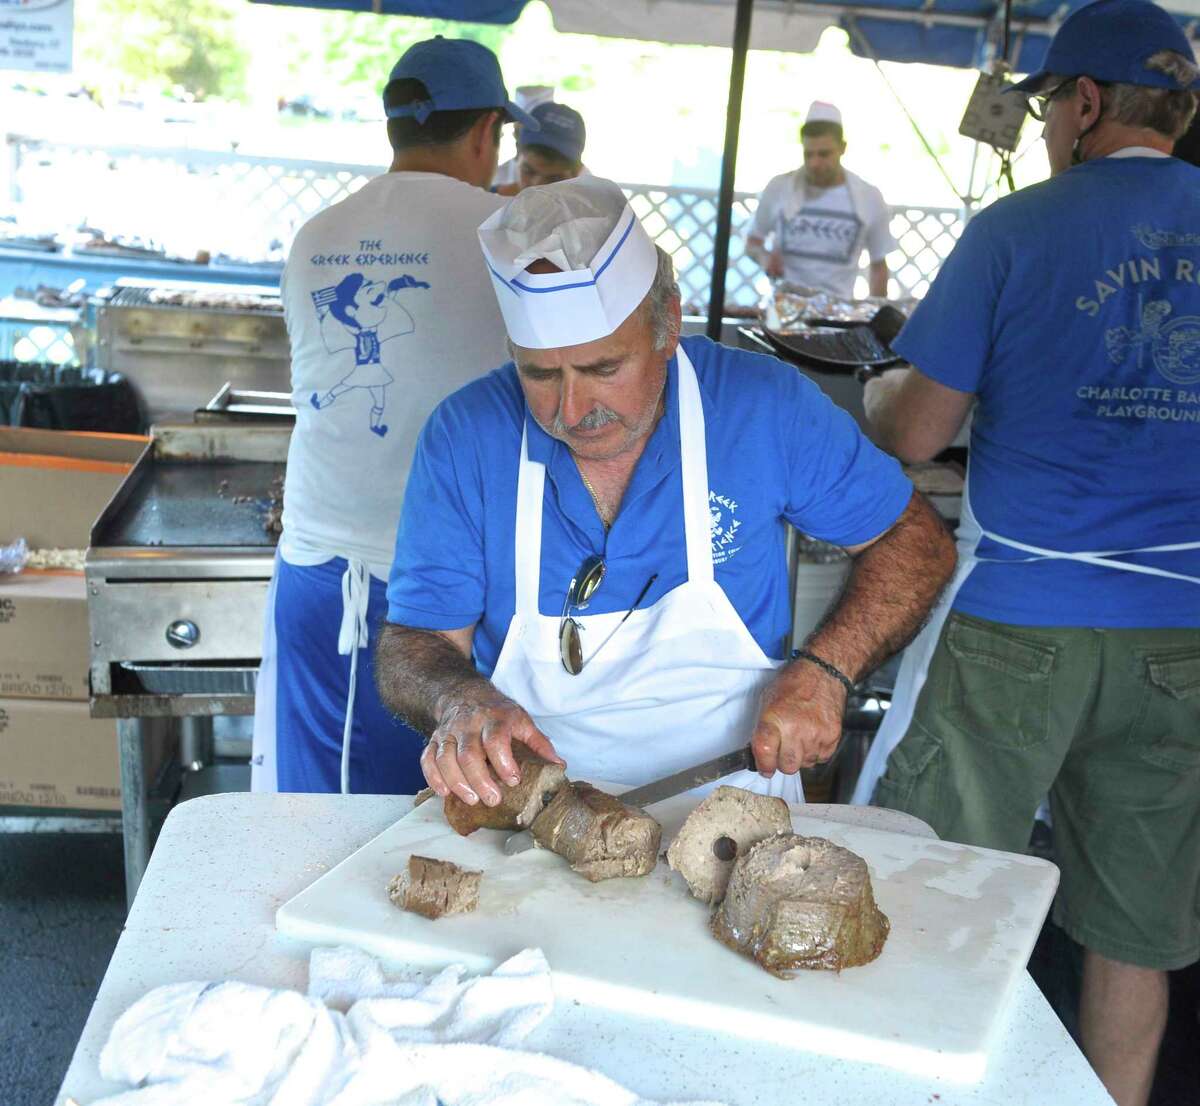 Spiro Rountos, of Danbury, cuts meat for gyros during the annual Assumption Greek Experience Festival, Friday, June 8, 2018, in Danbury, Conn. 